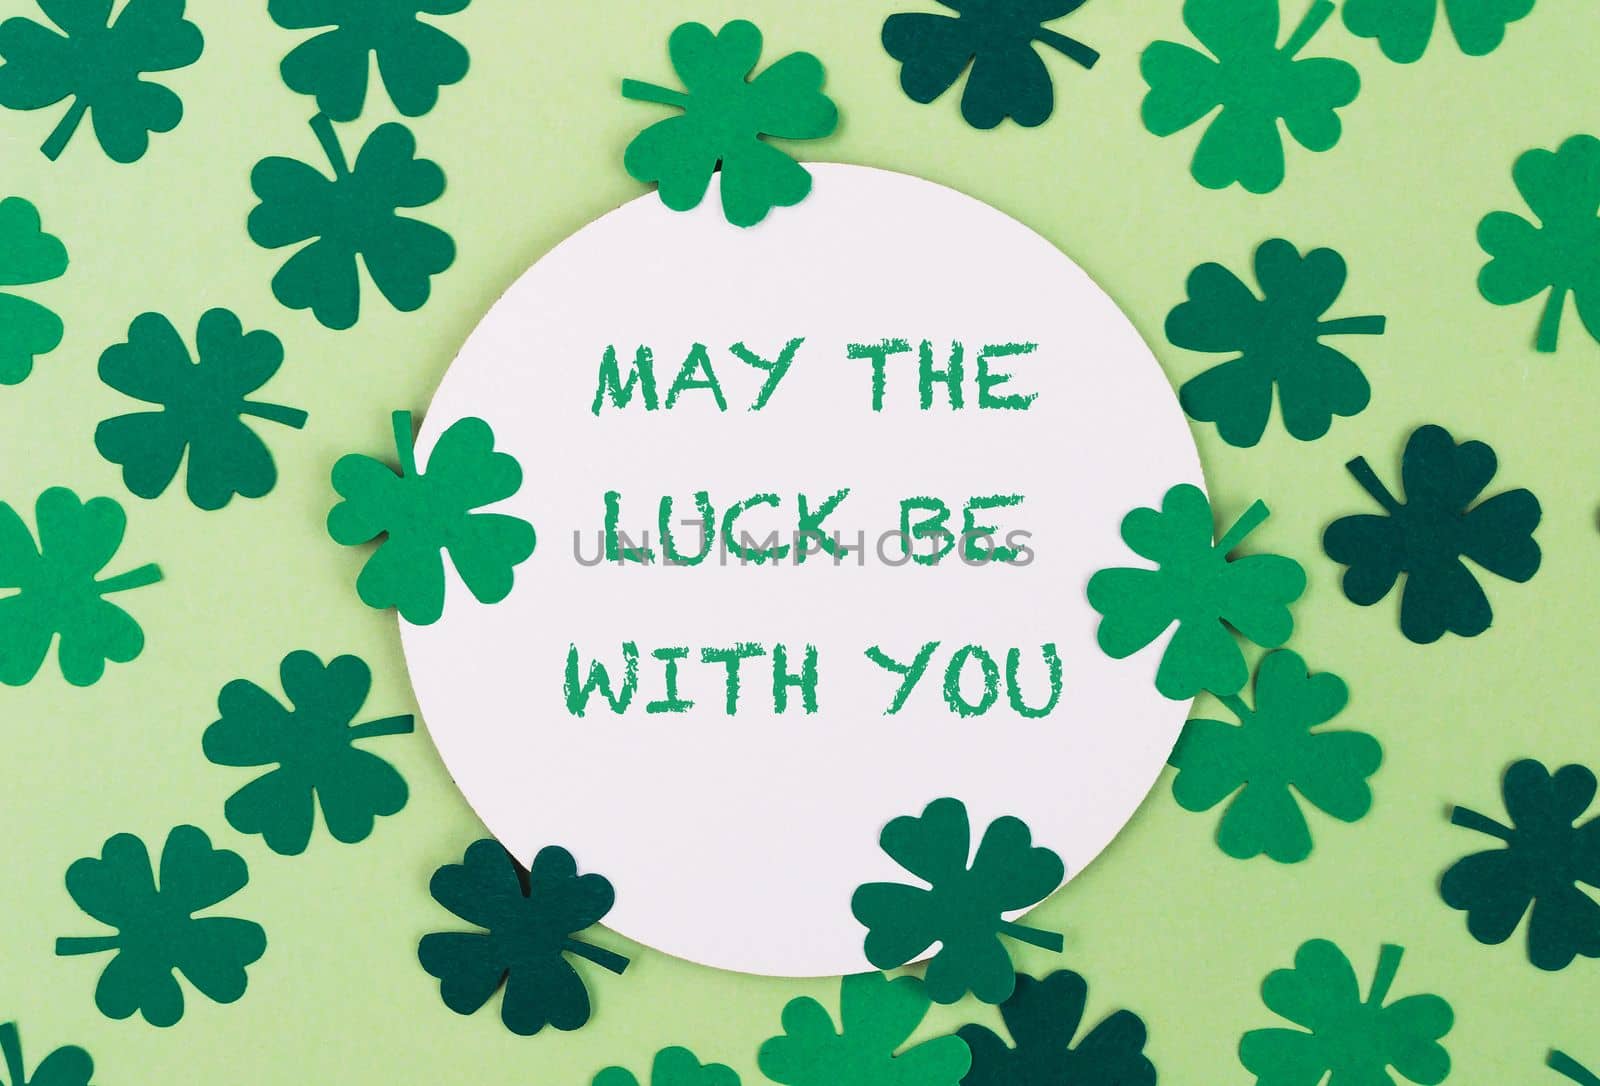 text on green background - May The Luck Be With You by Alla_Morozova93